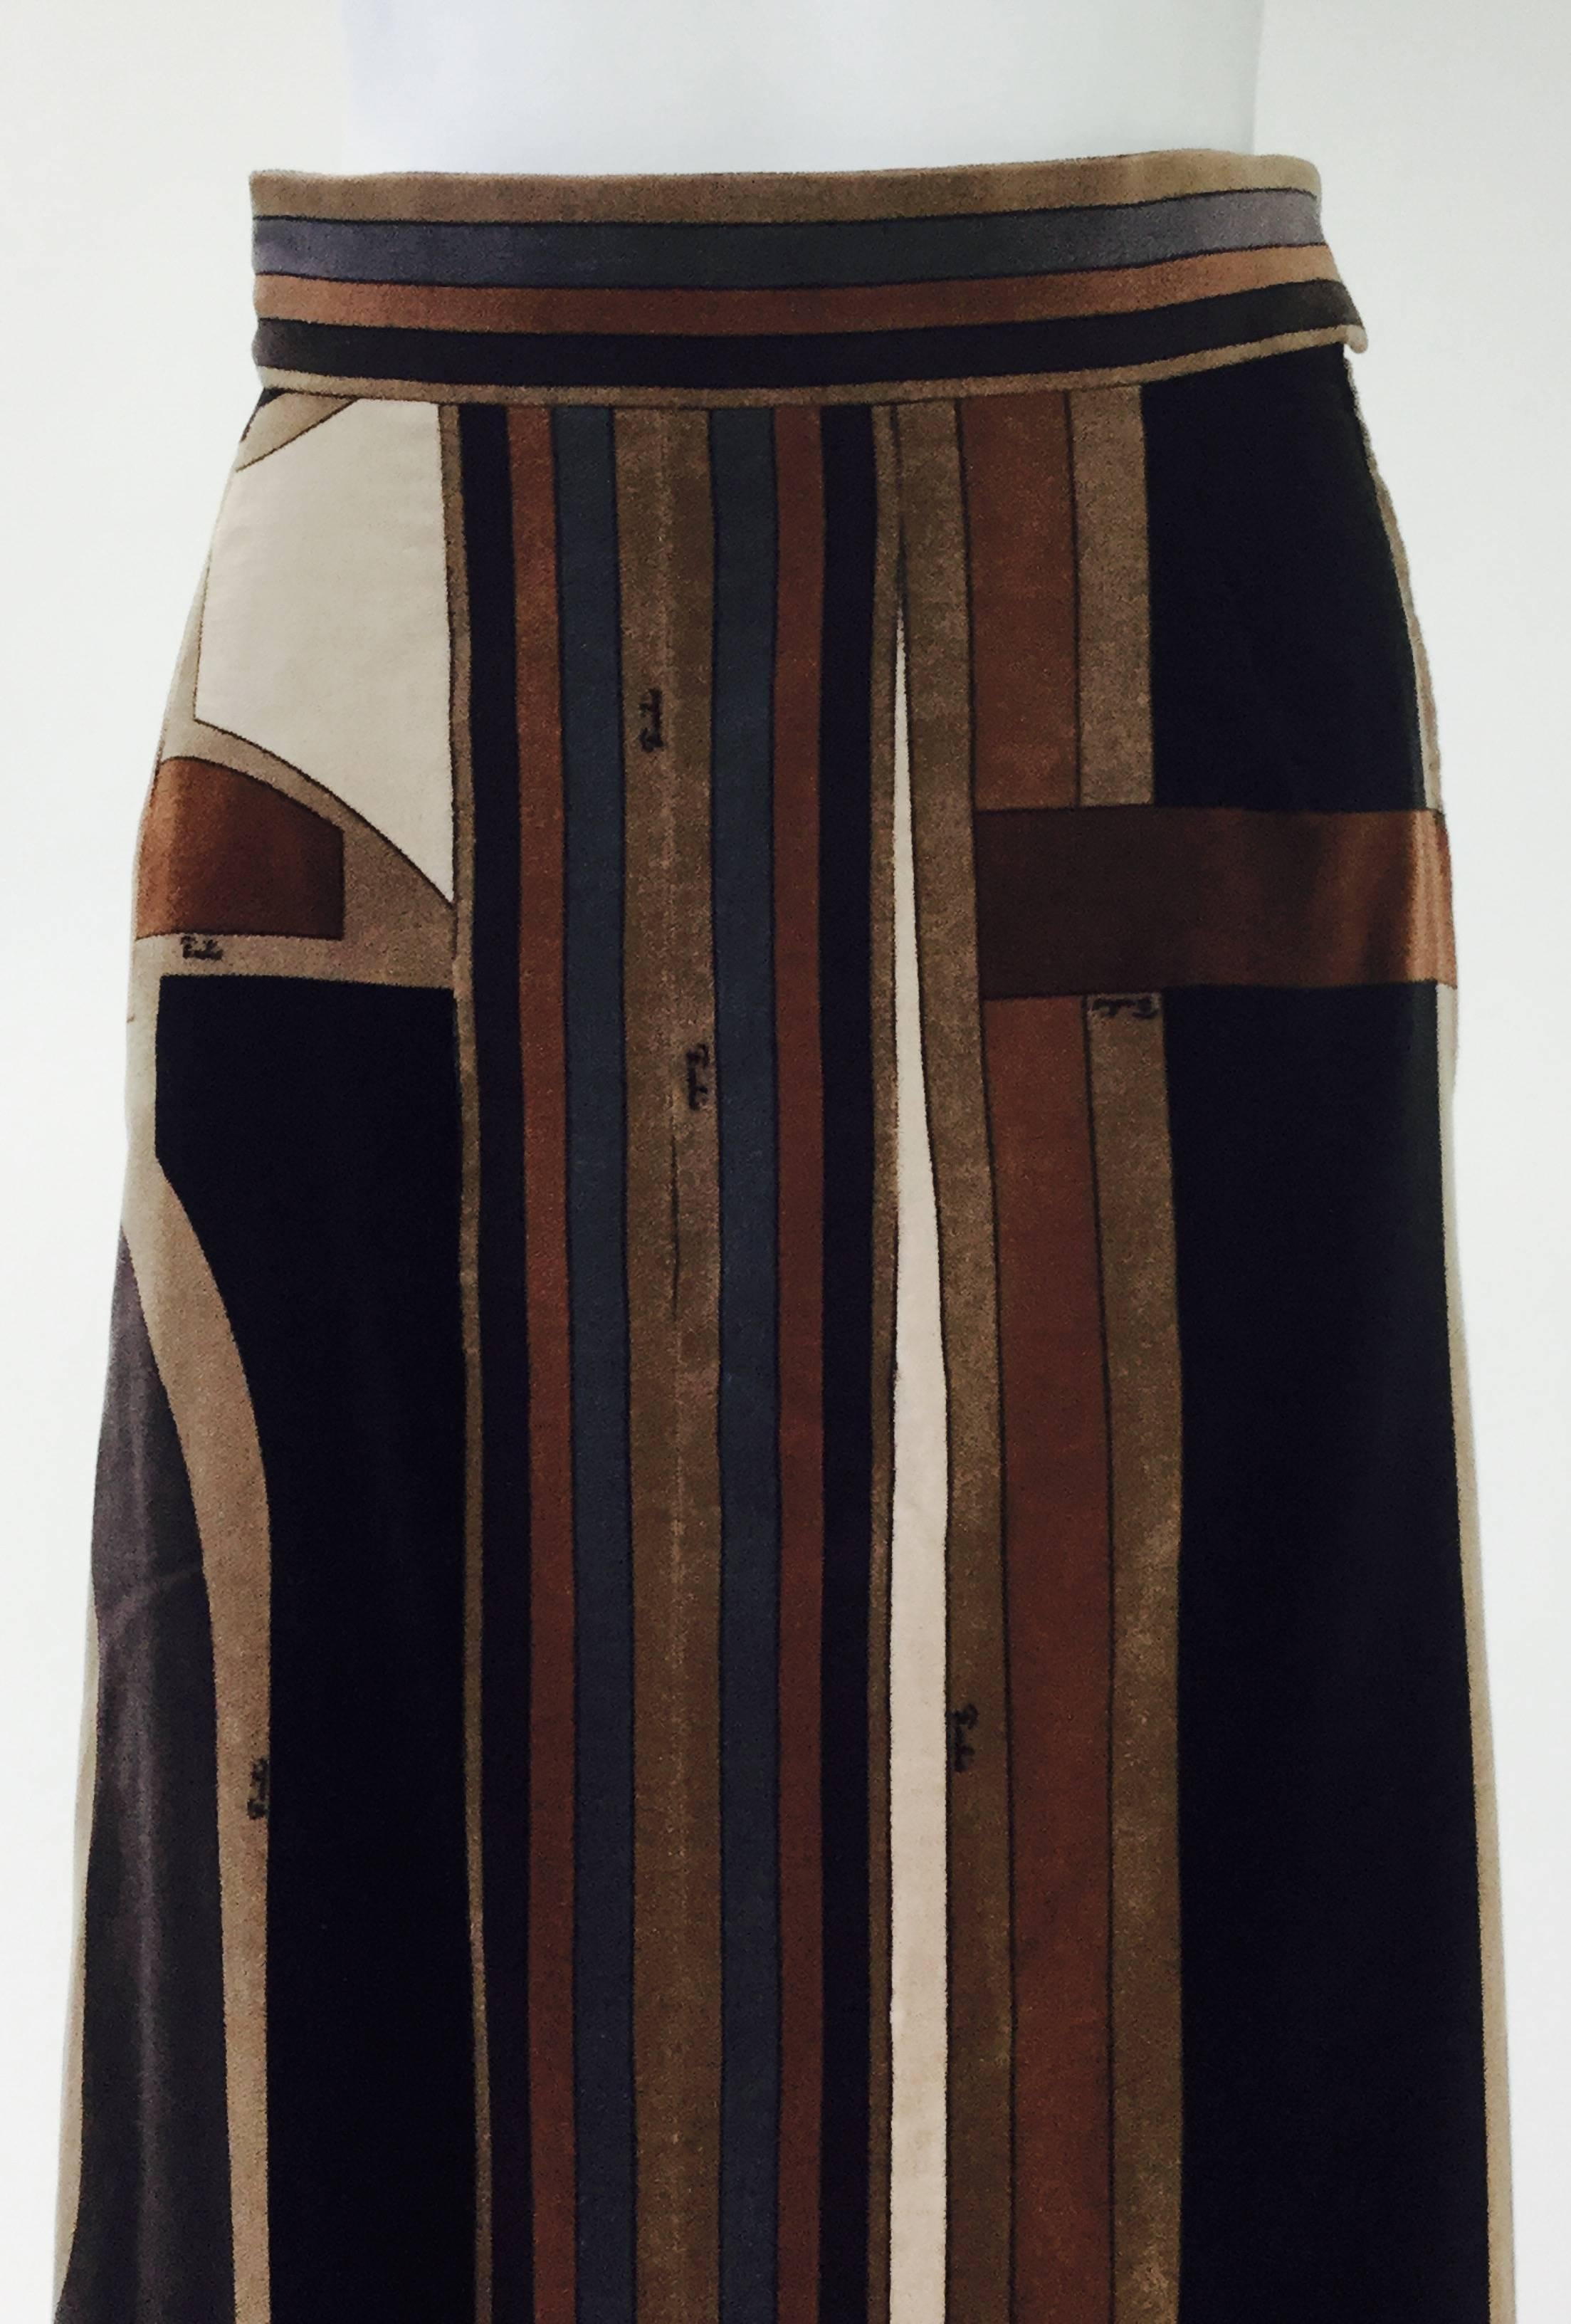 1970s velvet evening skirt by Emilio Pucci. This sumptuous velvet A-line ankle-length maxi evening skirt has an absolutely show-stopping print! The asymmetrical print features hard, straight lines coupled with elegant curves and angles, creating